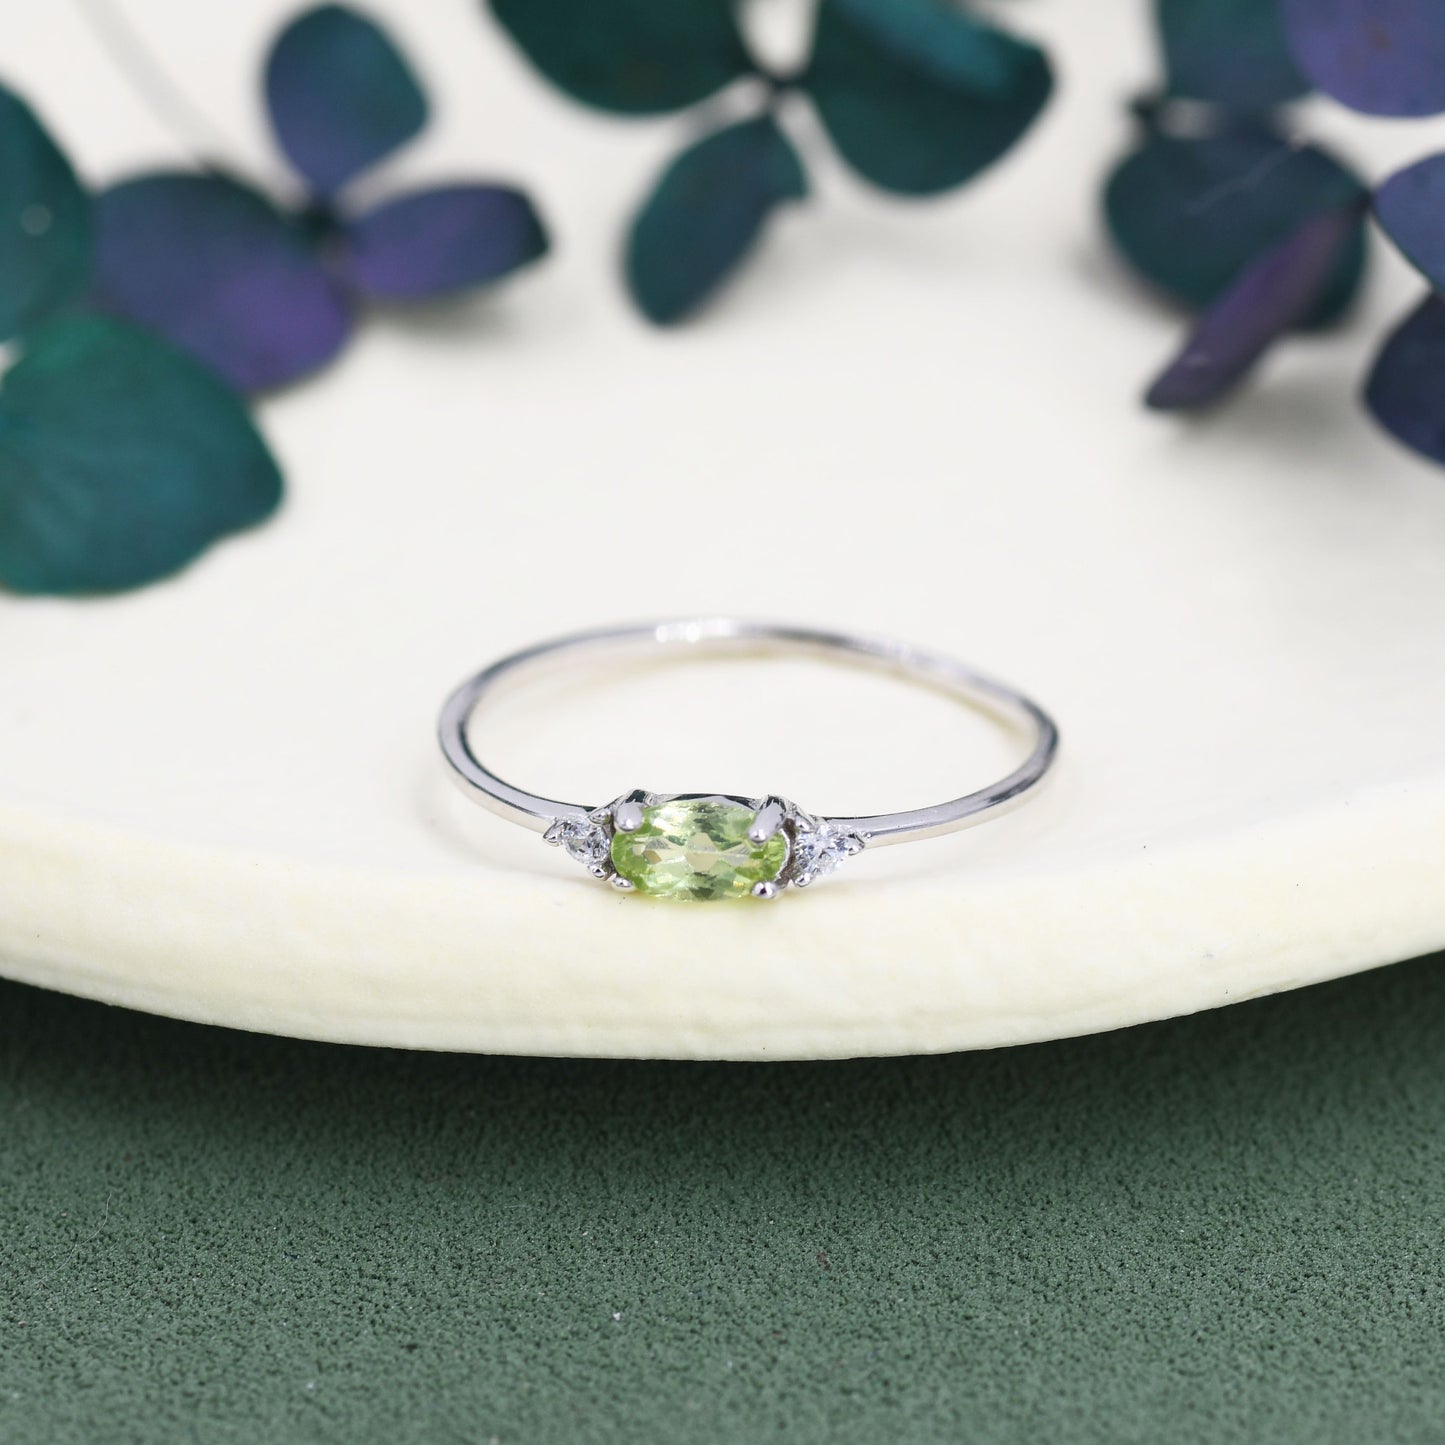 Natural Peridot Ring in Sterling Silver, Genuine Green Periot Ring, Dainty Gemstone Ring, US 5-8. August Birthstone